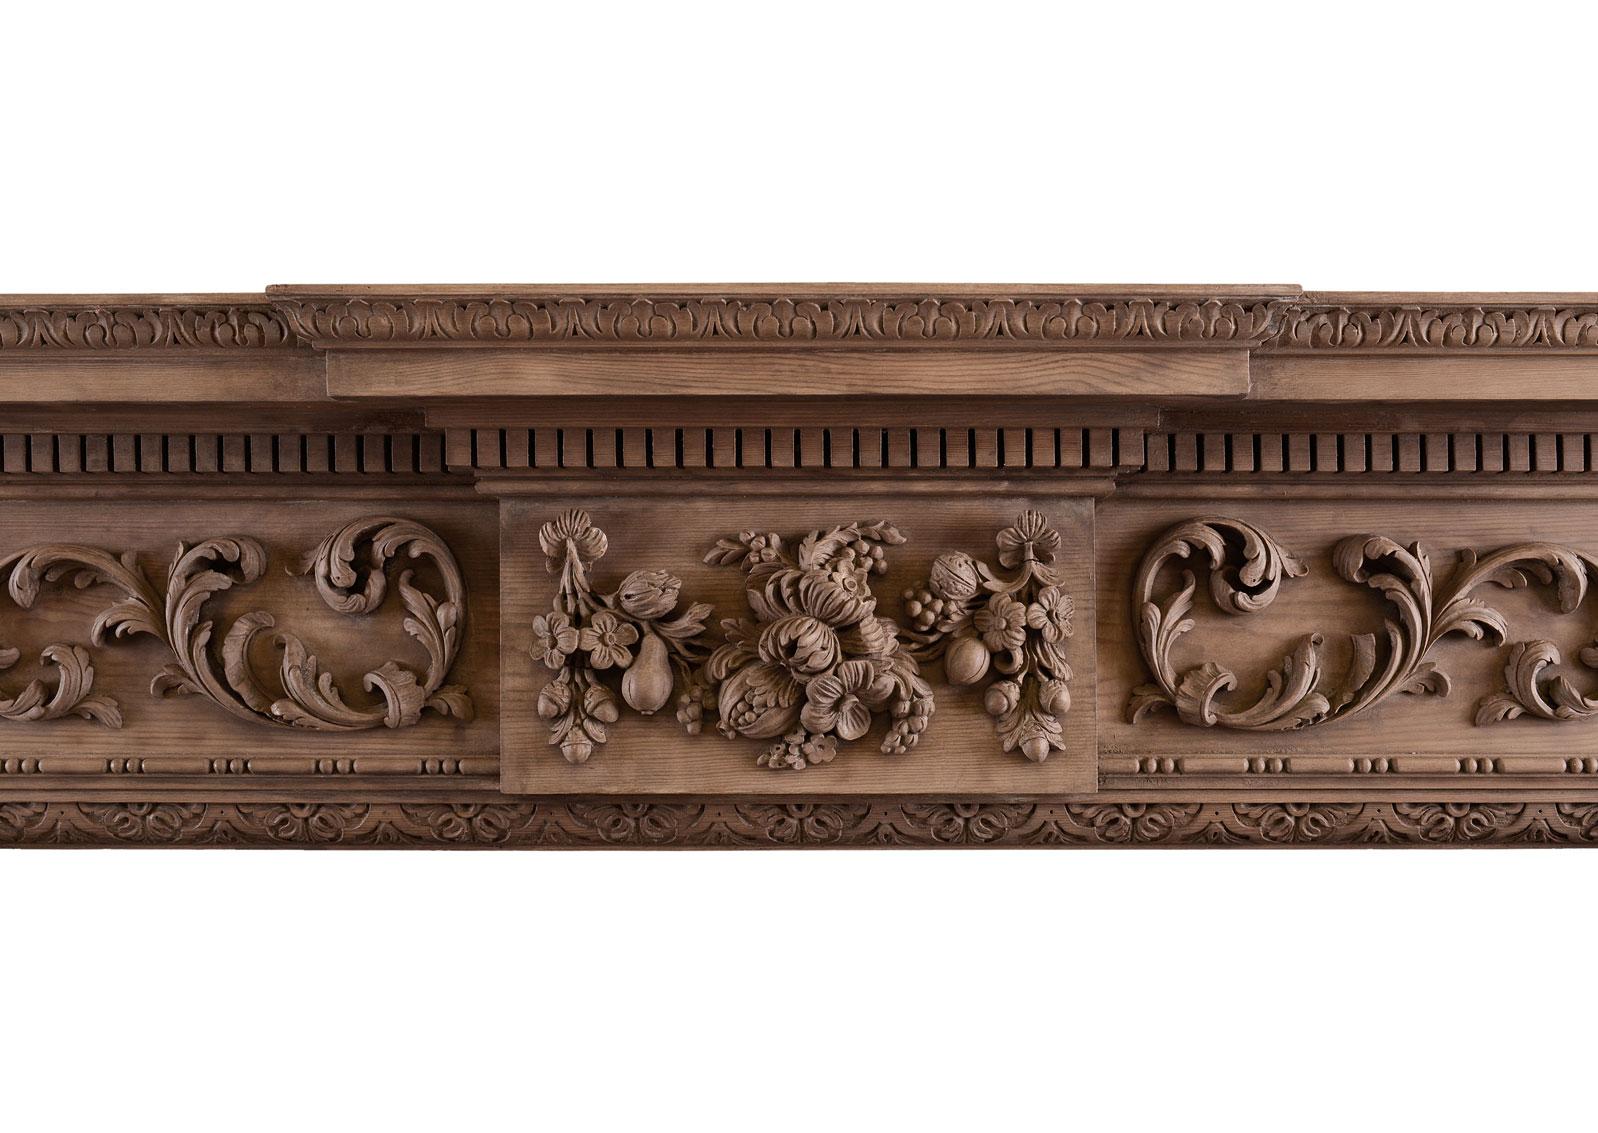 A carved English pine fireplace. The jambs with carved bellflowers surmounted by a cartouche. The frieze with central blocking featuring heavily carved flowers, acorns and leaf work, flanked by scrollwork. The shelf with dentils throughout, and